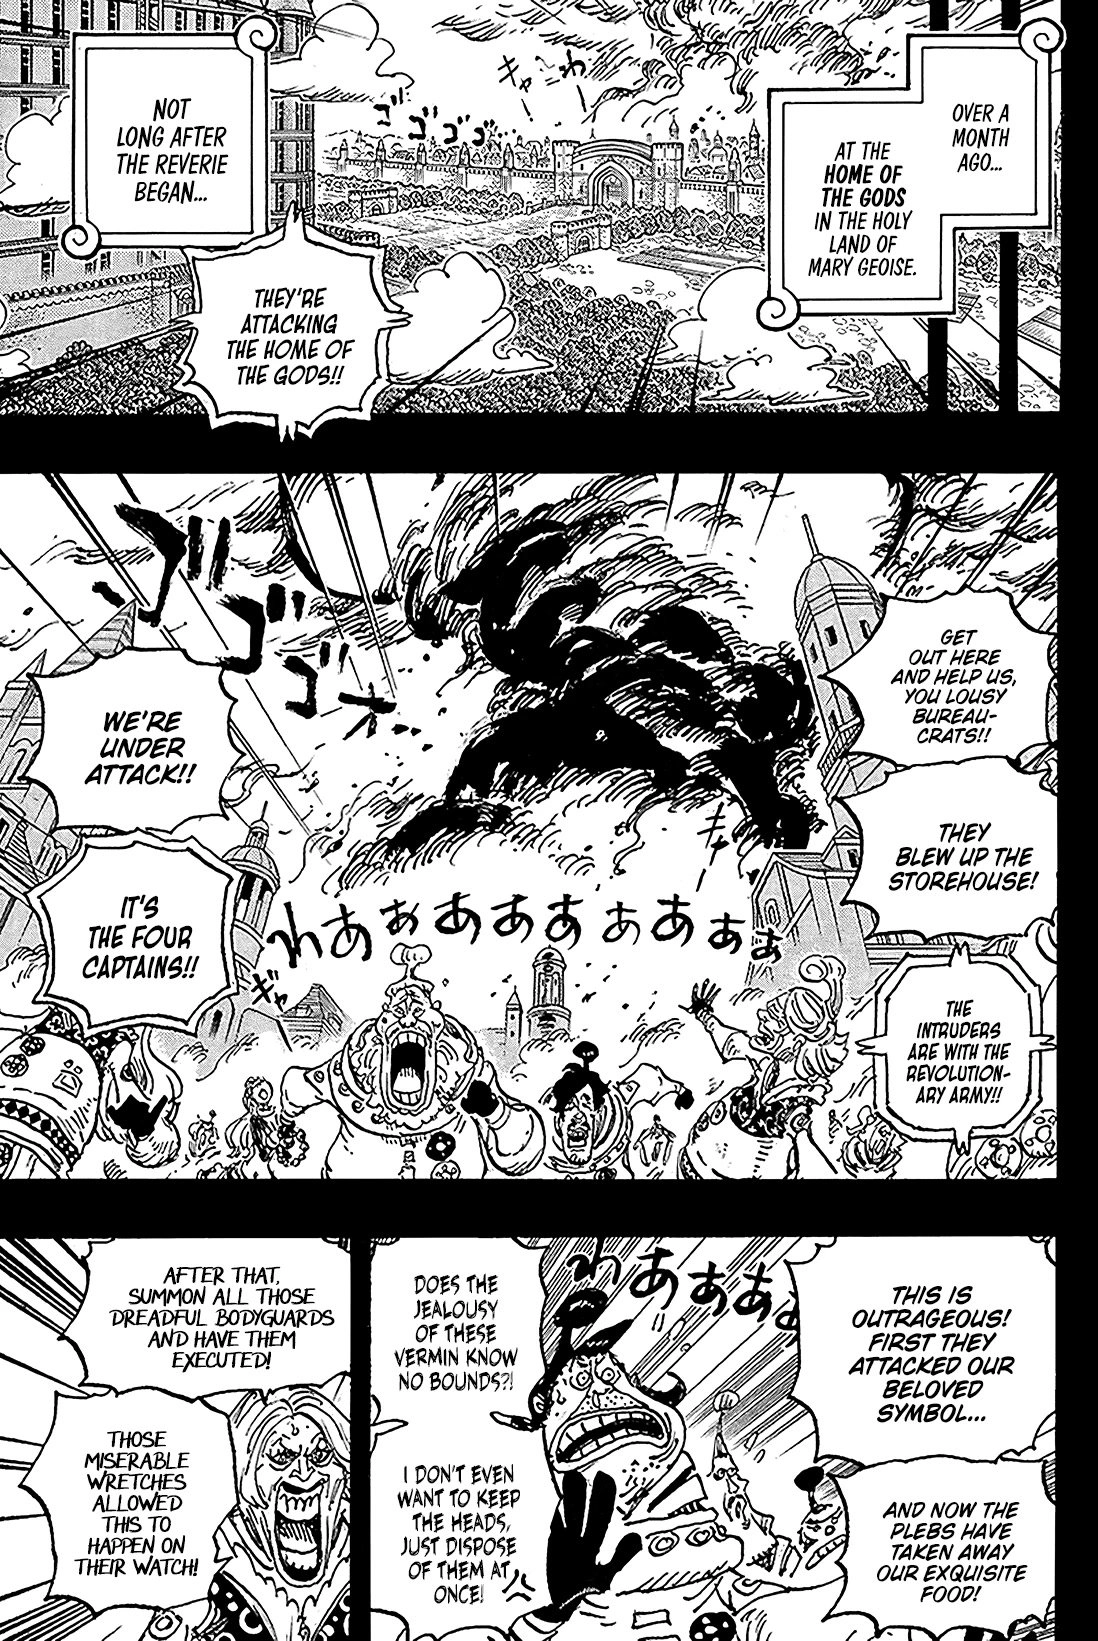 One Piece Chapter 1083